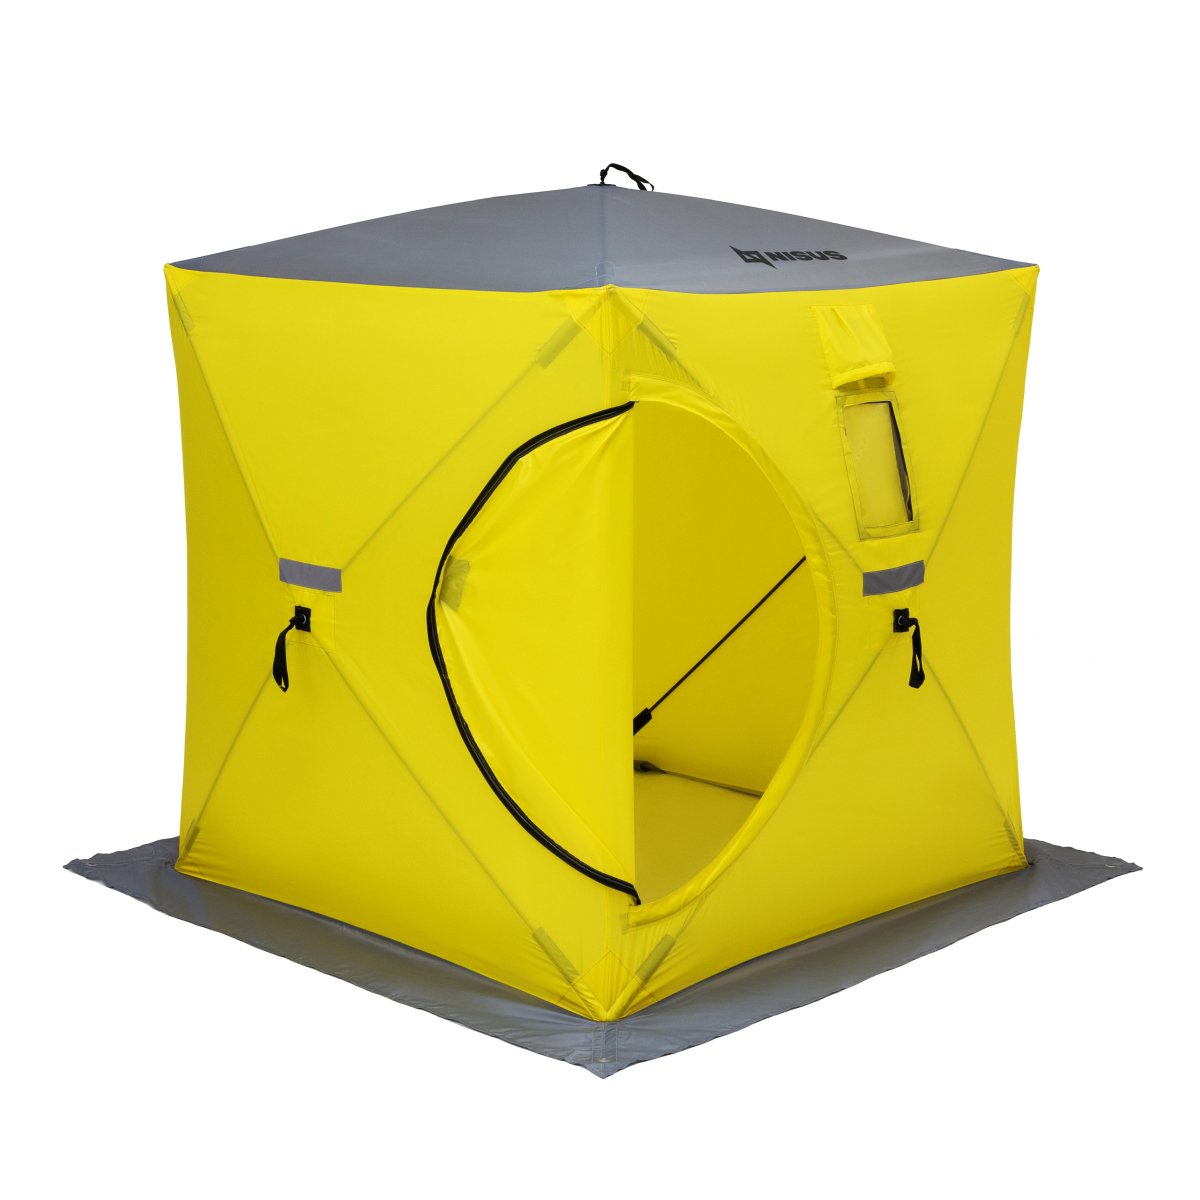 Cube Portable Pop-Up Ice Fishing Shelter for 2 Persons, yellow and gray color